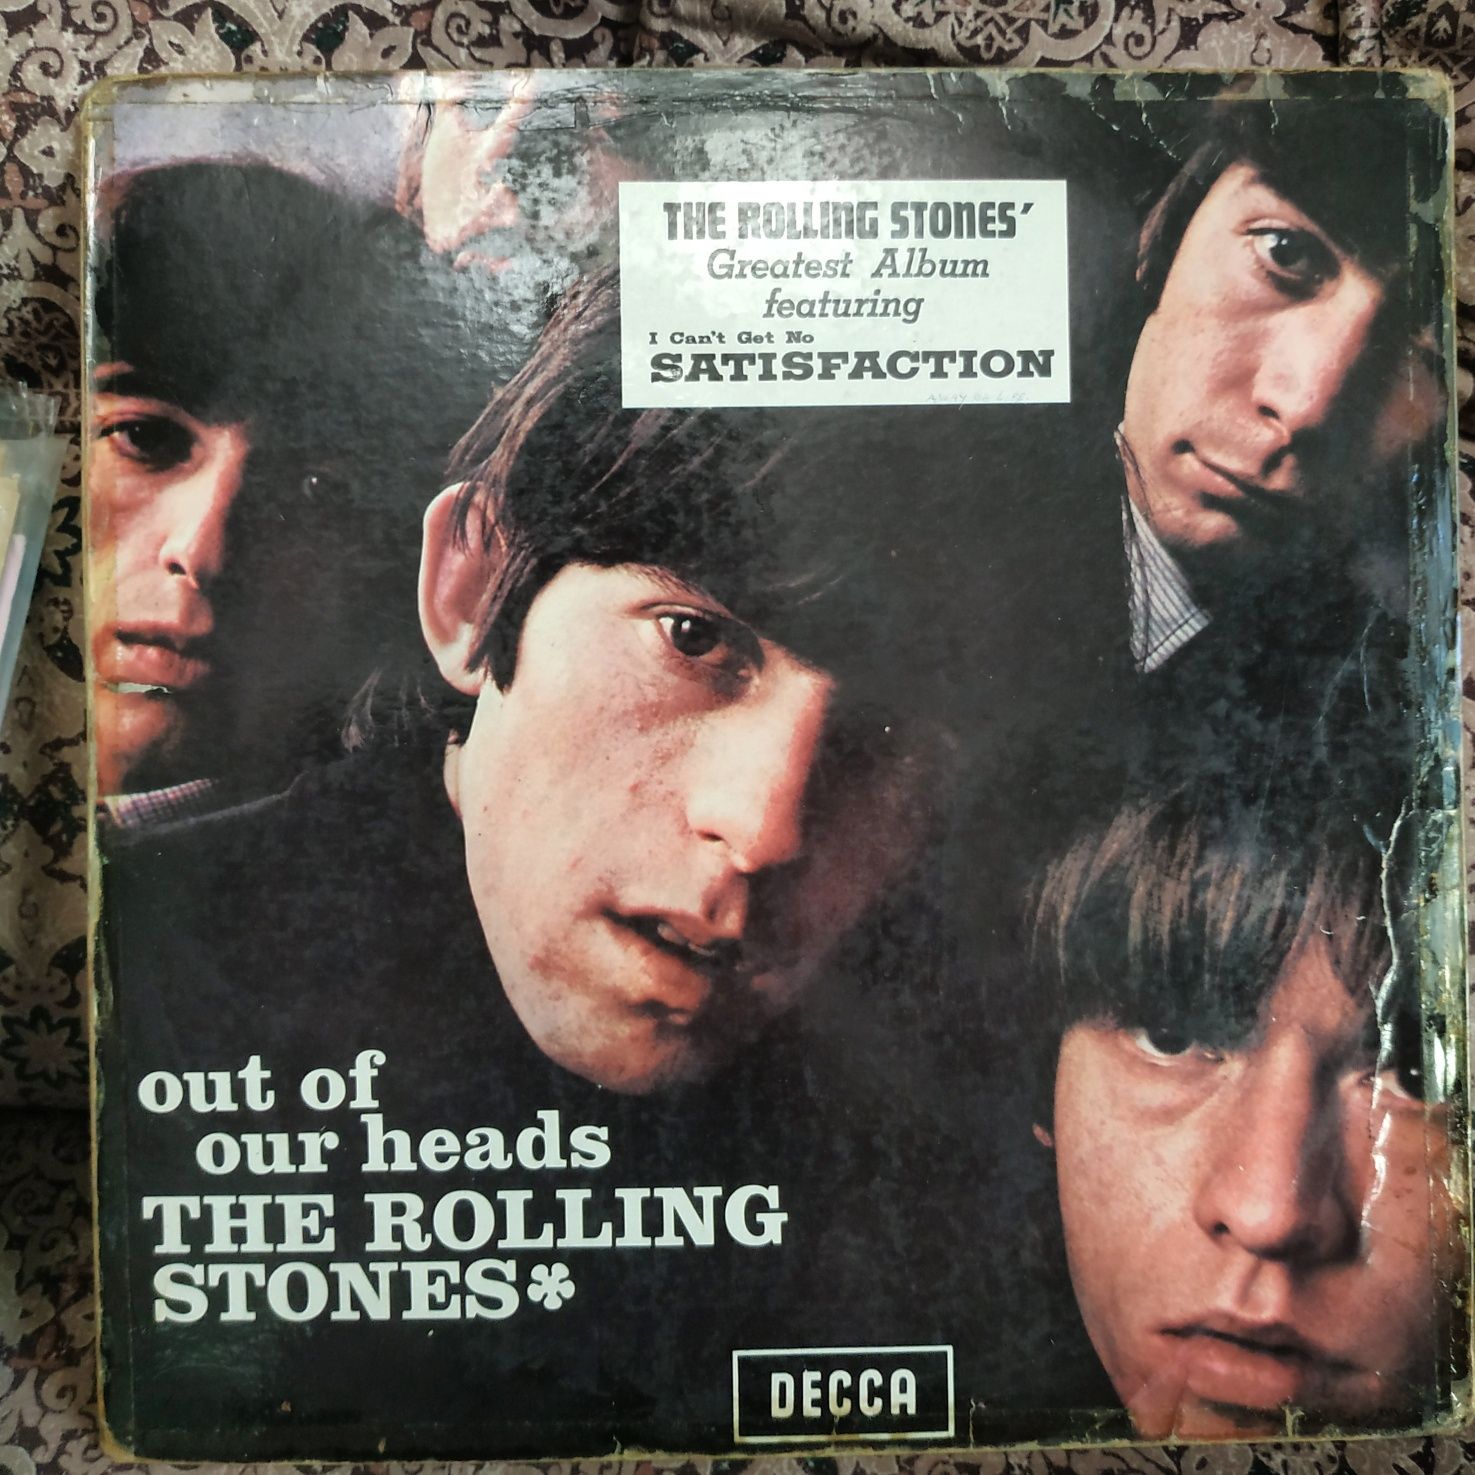 Виниловая пластинка. Винил. Rolling Stones. Out Of Our Heads